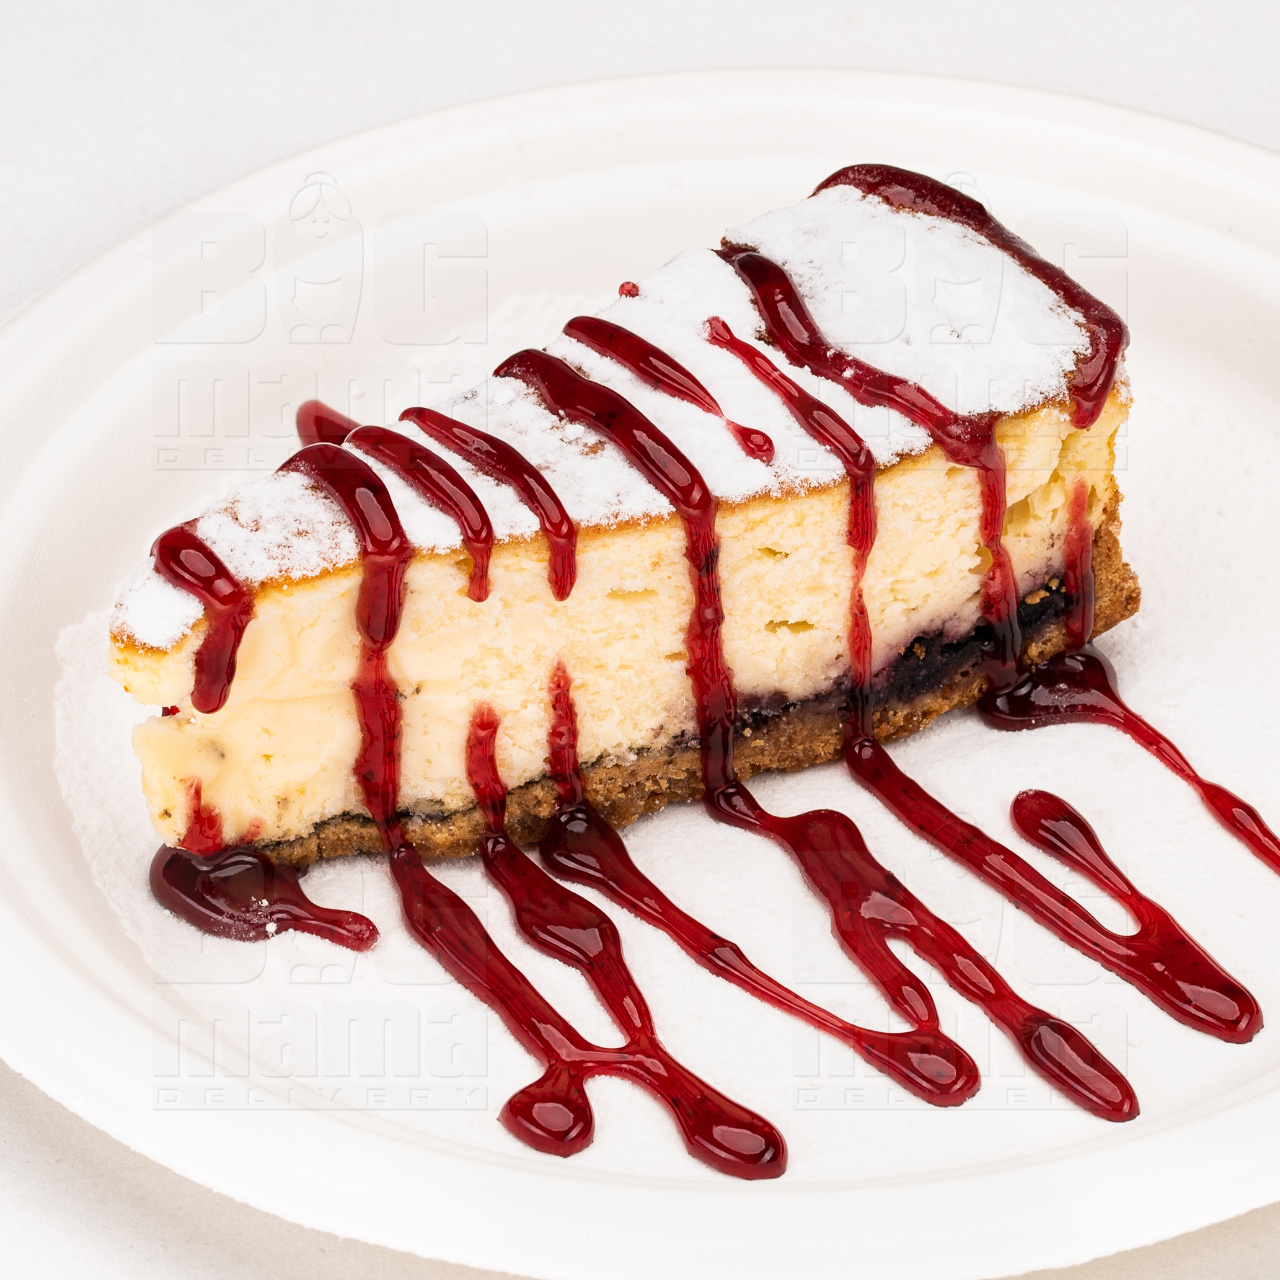 Product #244 image - Cheese cake